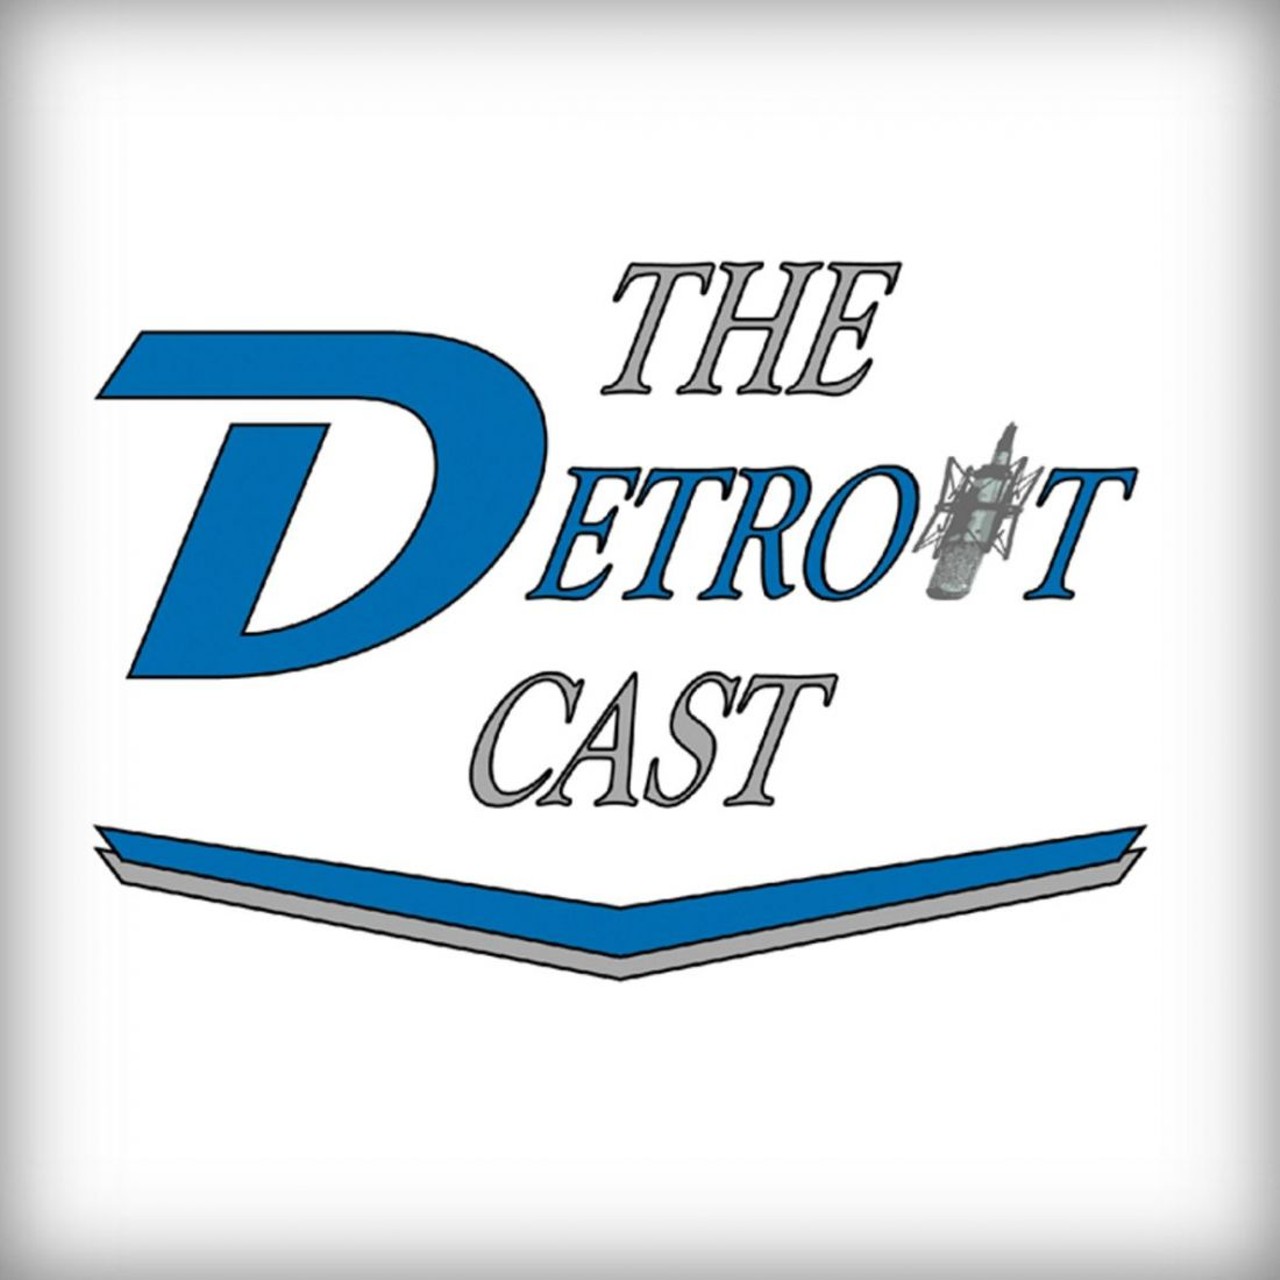  The Detroit Cast 
Based in Franklin, The Detroit Cast is not for those with sensitive, easily offended ears. Hosts Mike and Jay discuss sports, politics, and world news sprinkled with offhanded commentary and sarcastic remarks. The Detroit Casts prides themselves on a radio sound that isn&#146;t filtered by the FCC or corporate rules. 
Photo via PodcastDetroit.com 